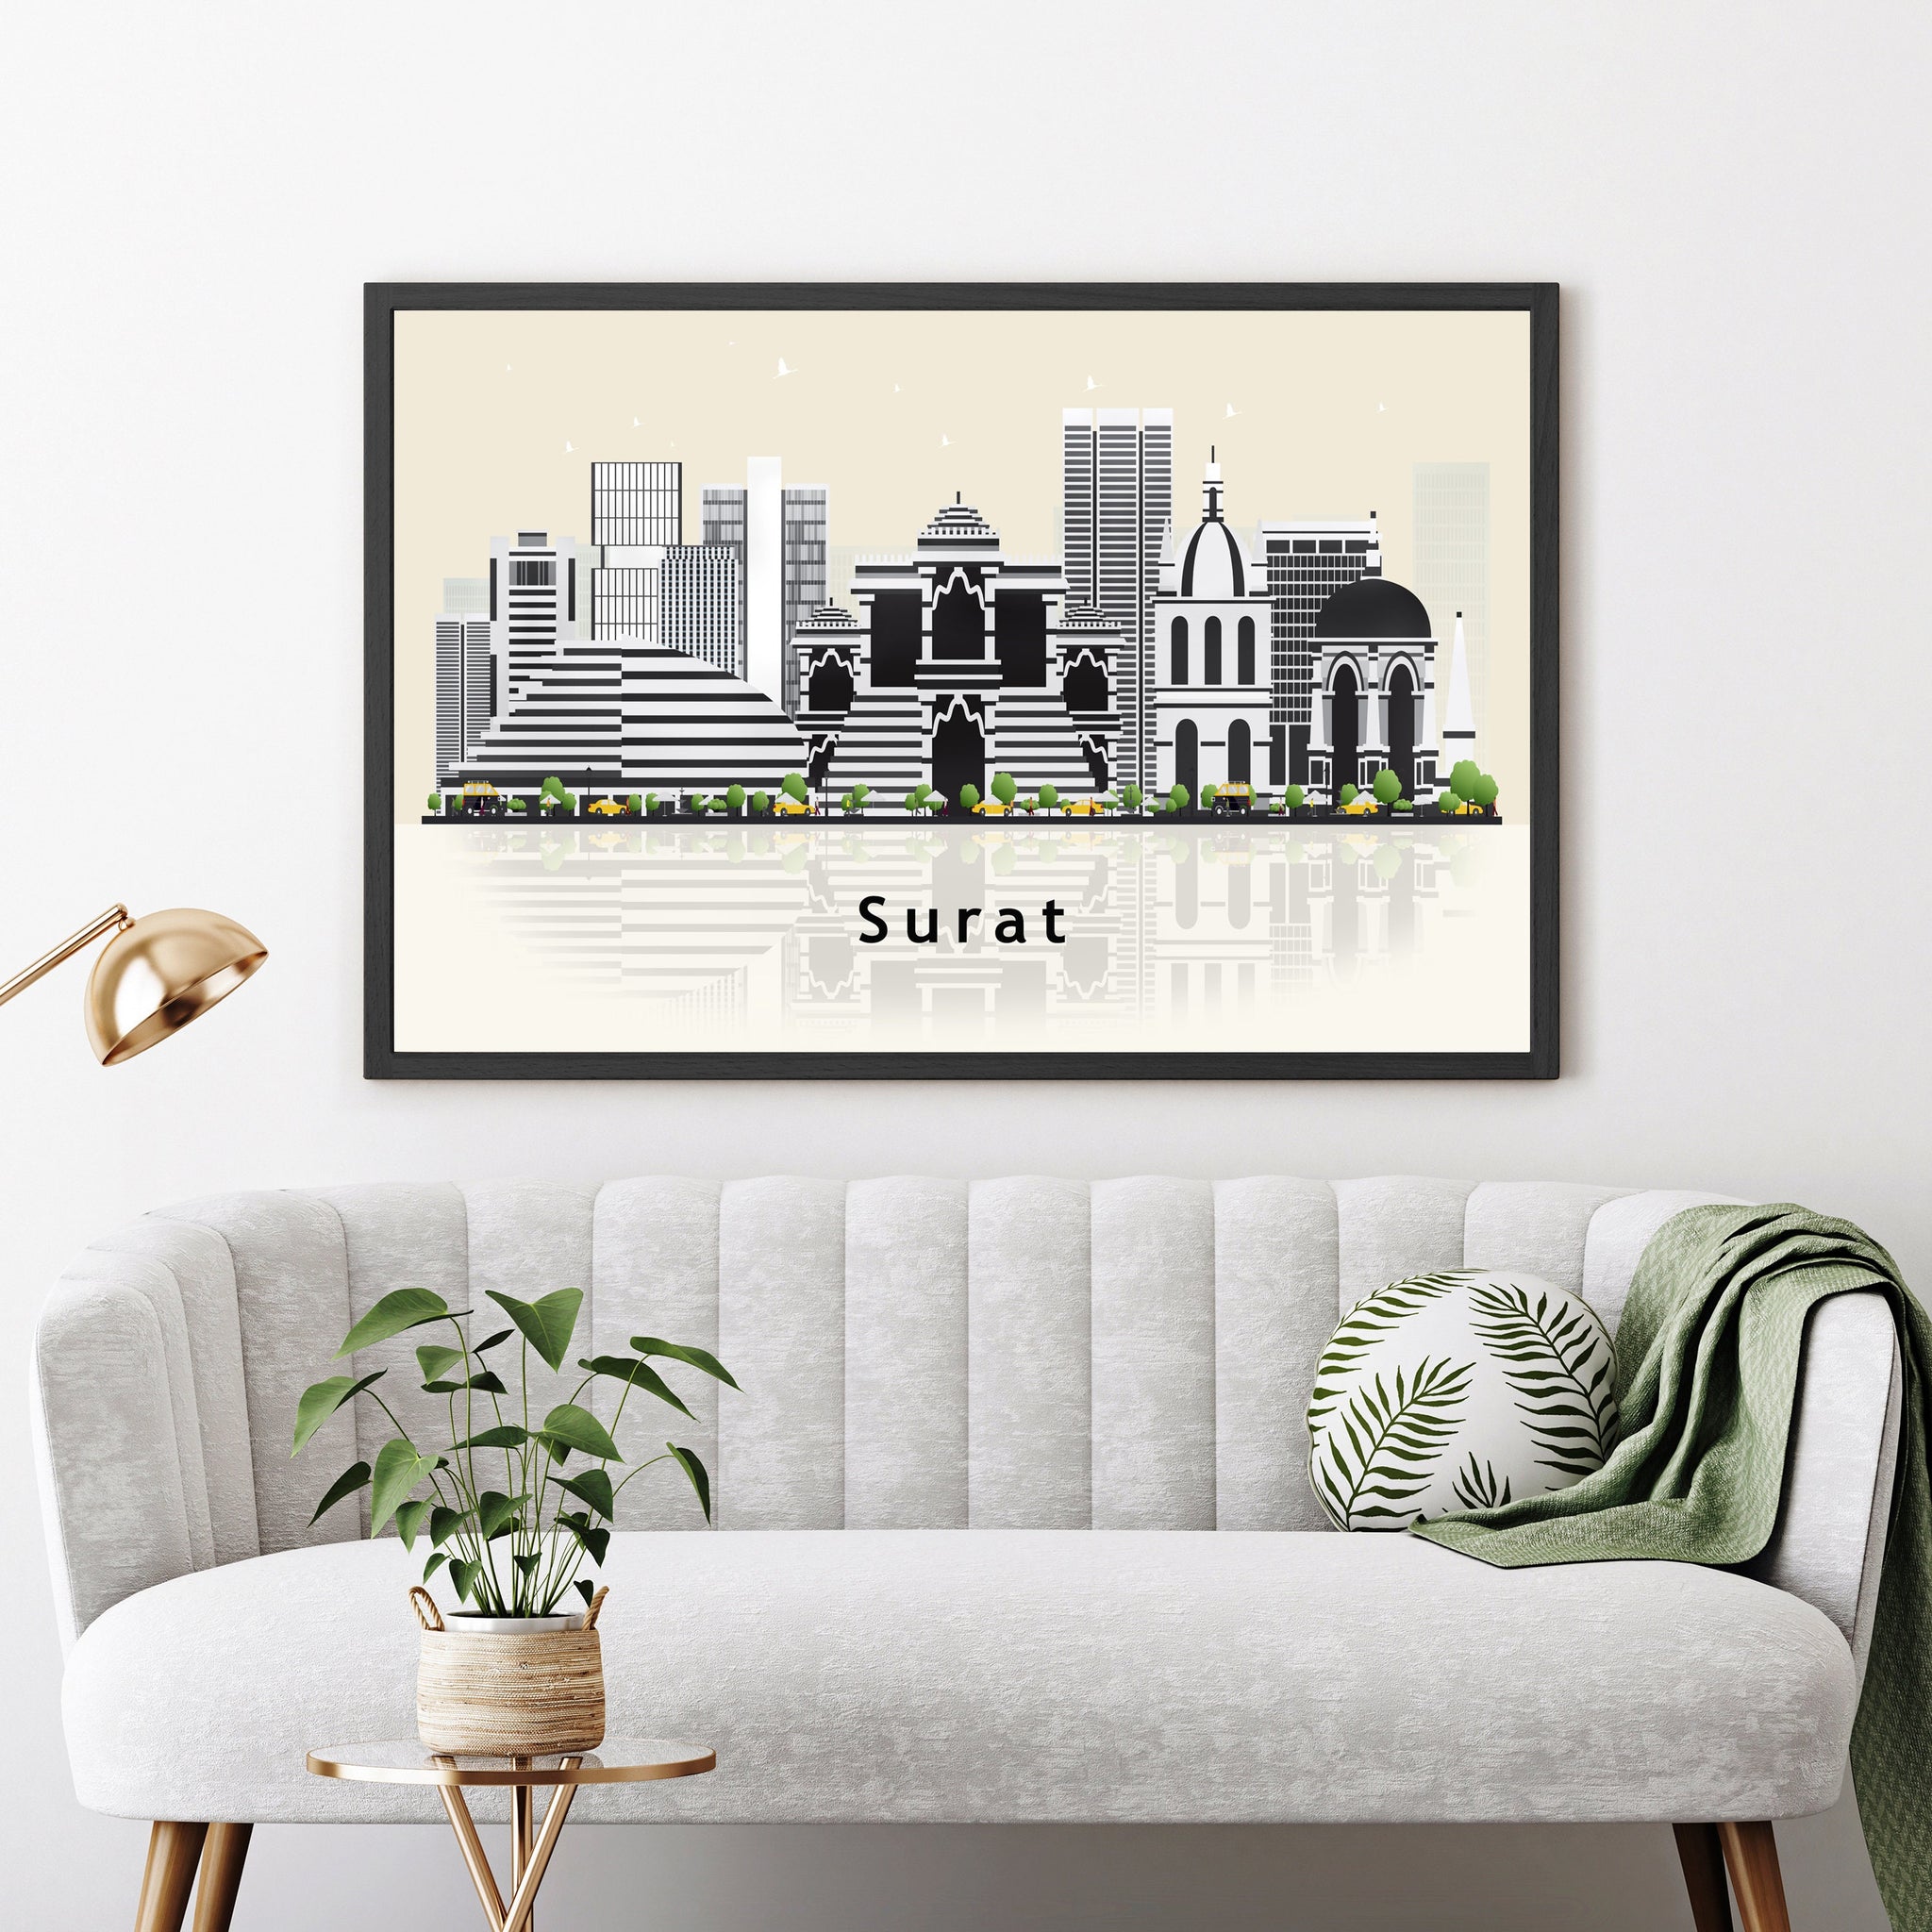 SURAT INDIA Illustration skyline poster, Modern skyline cityscape poster, India city skyline landmark map poster, Home wall decoration